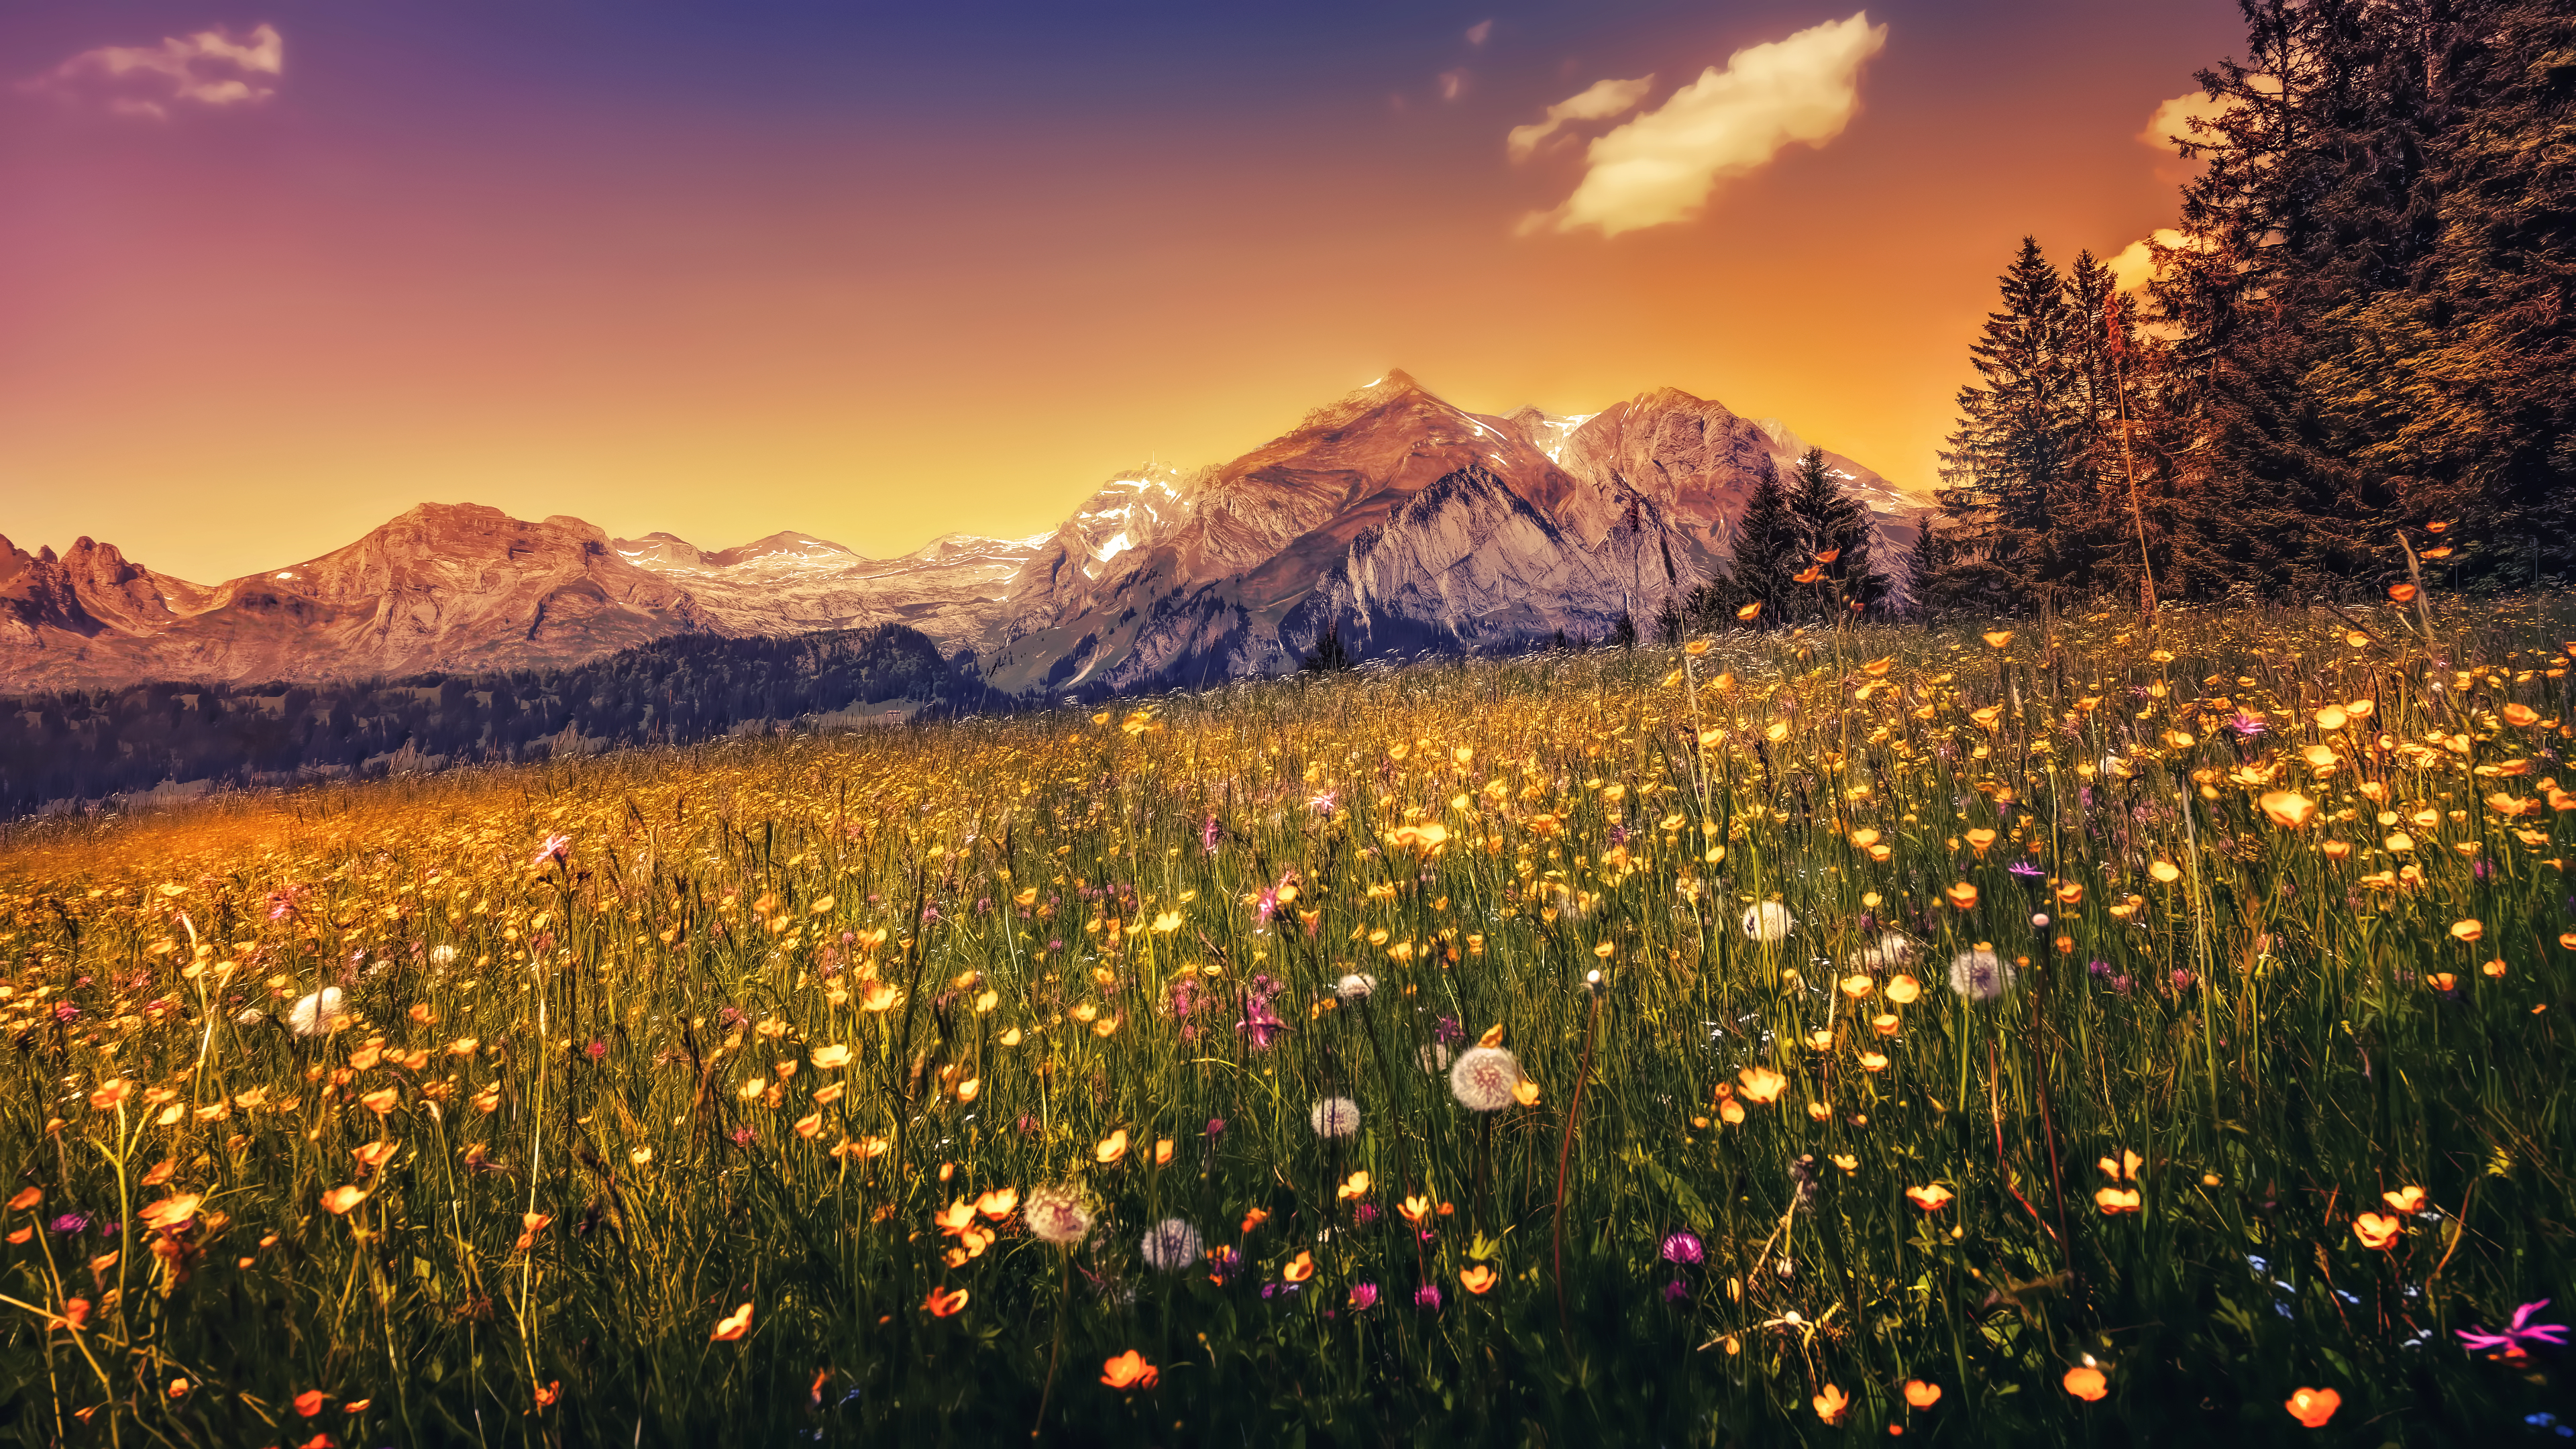 General 3840x2160 landscape nature mountains sunset panorama sunlight flowers